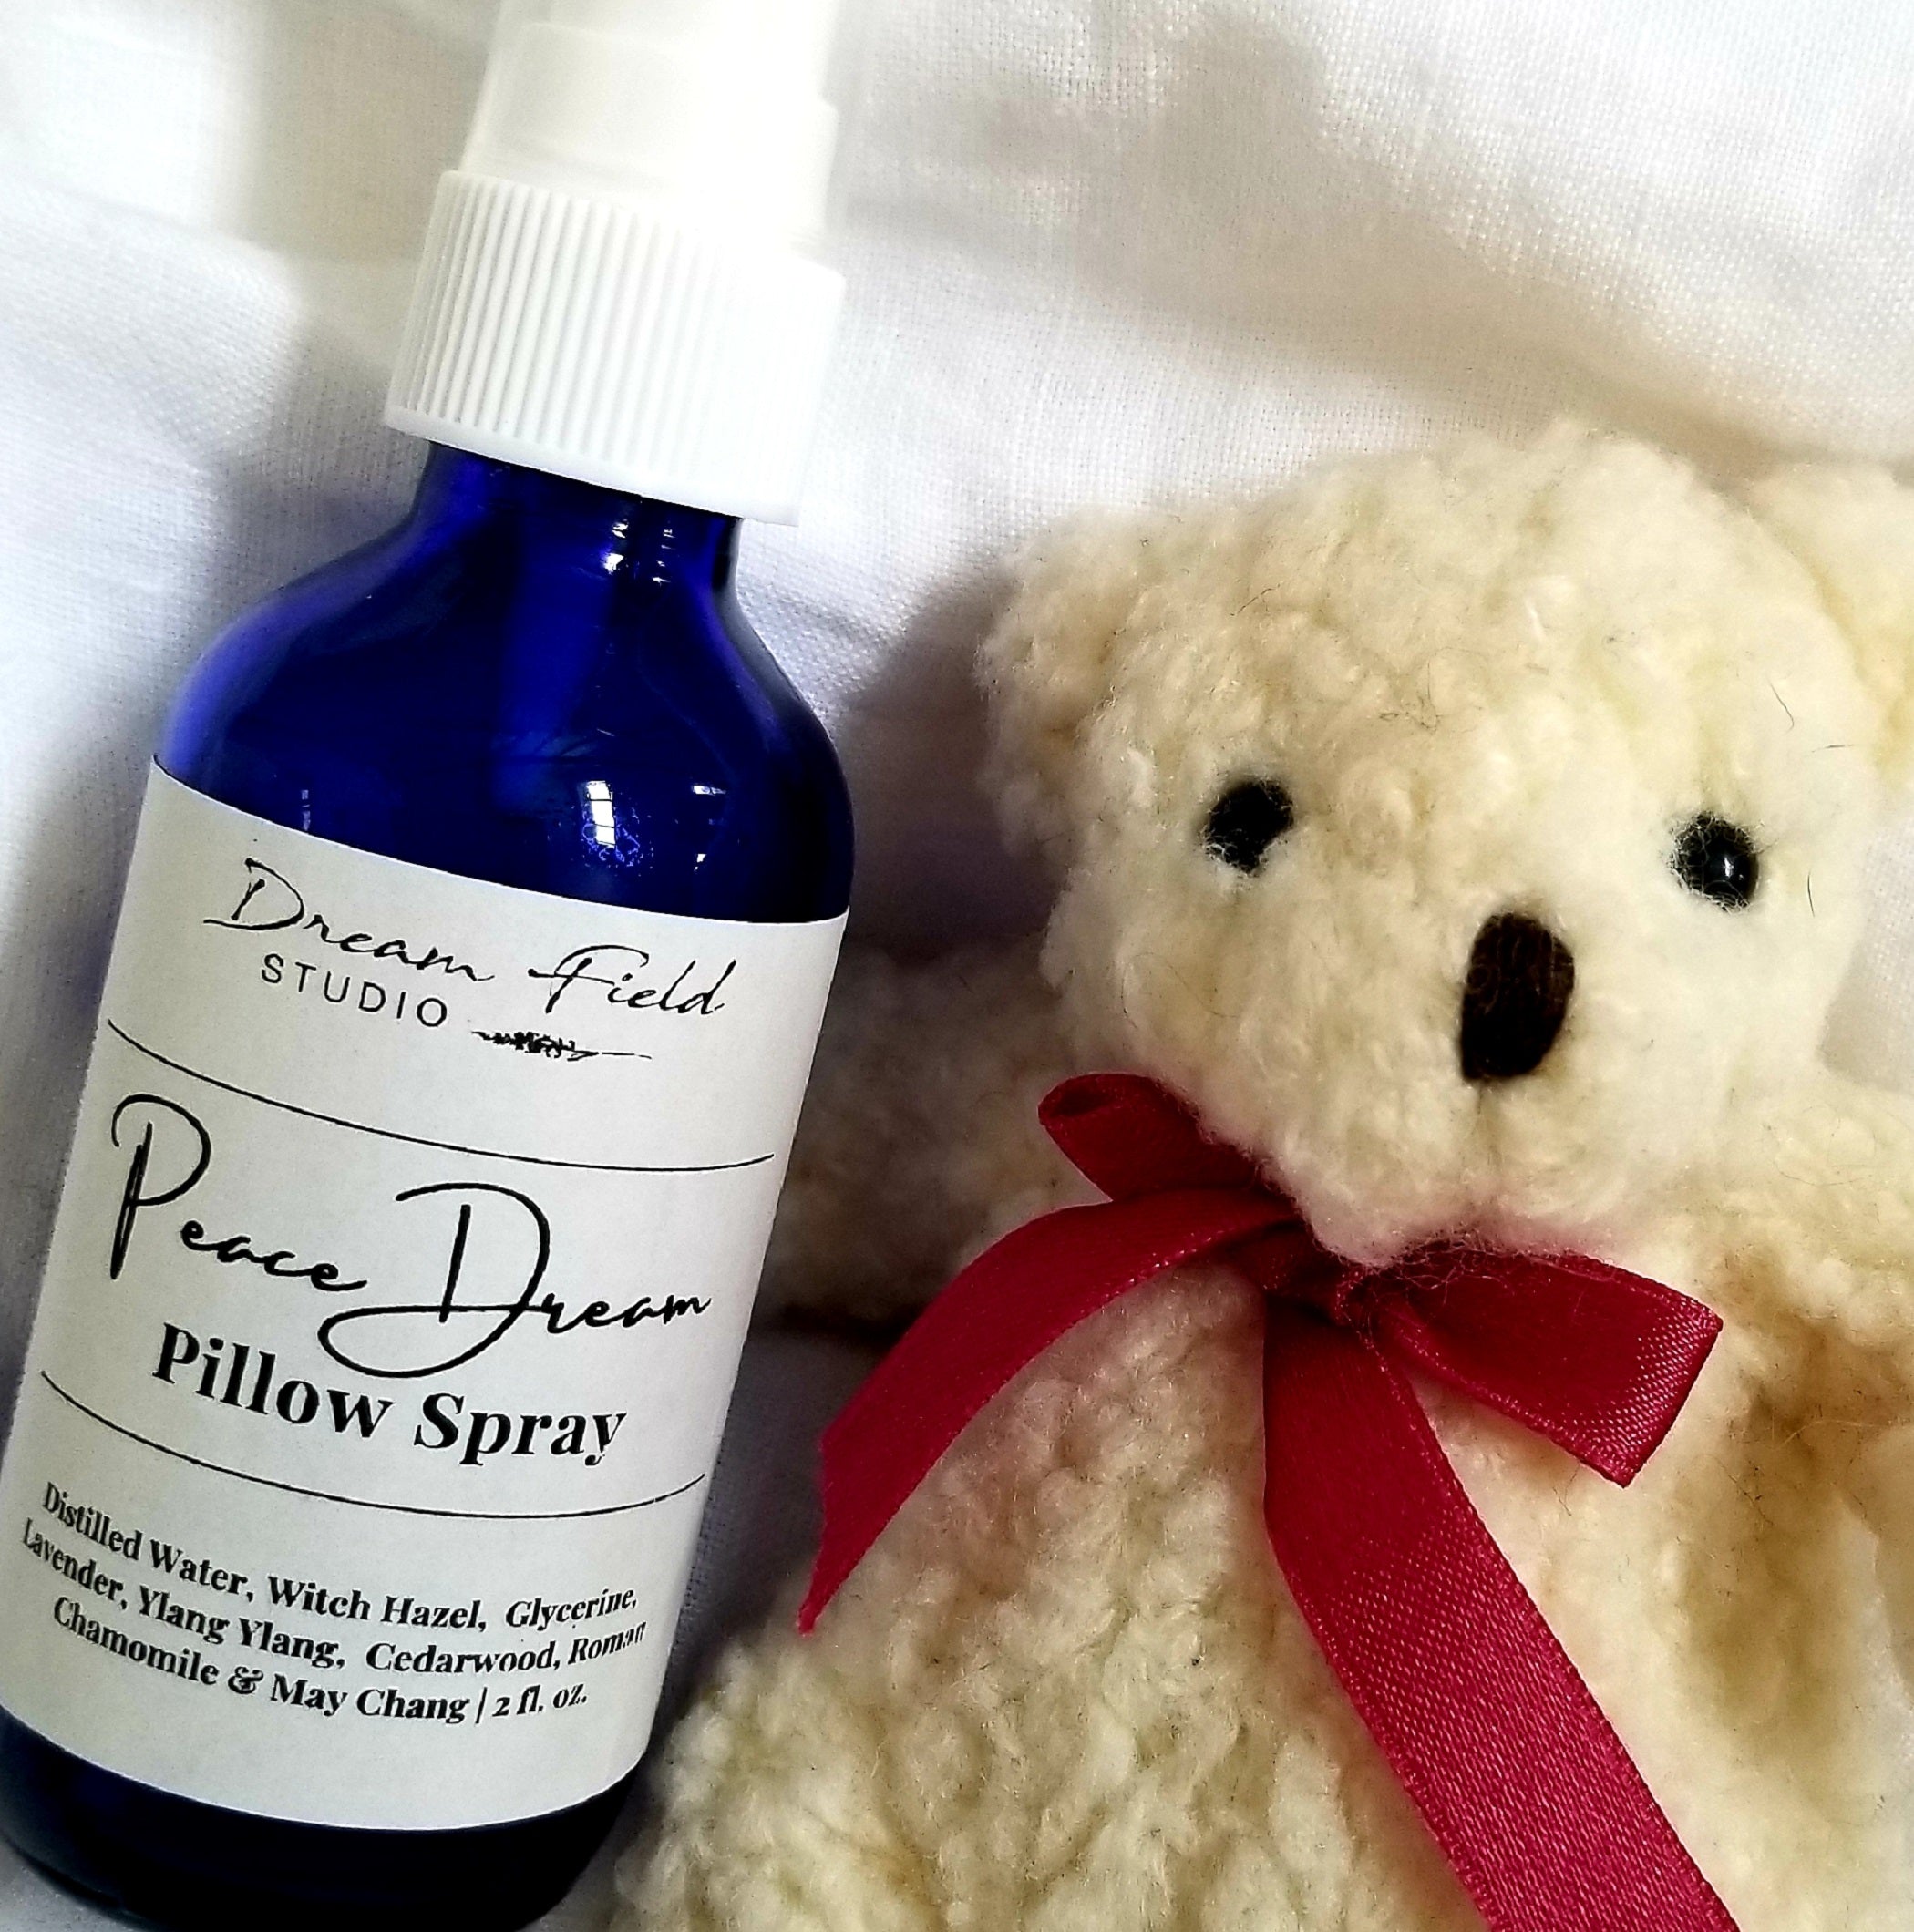 Natural Calming Pillow Spray for Better Sleep Quality - Peace Dream